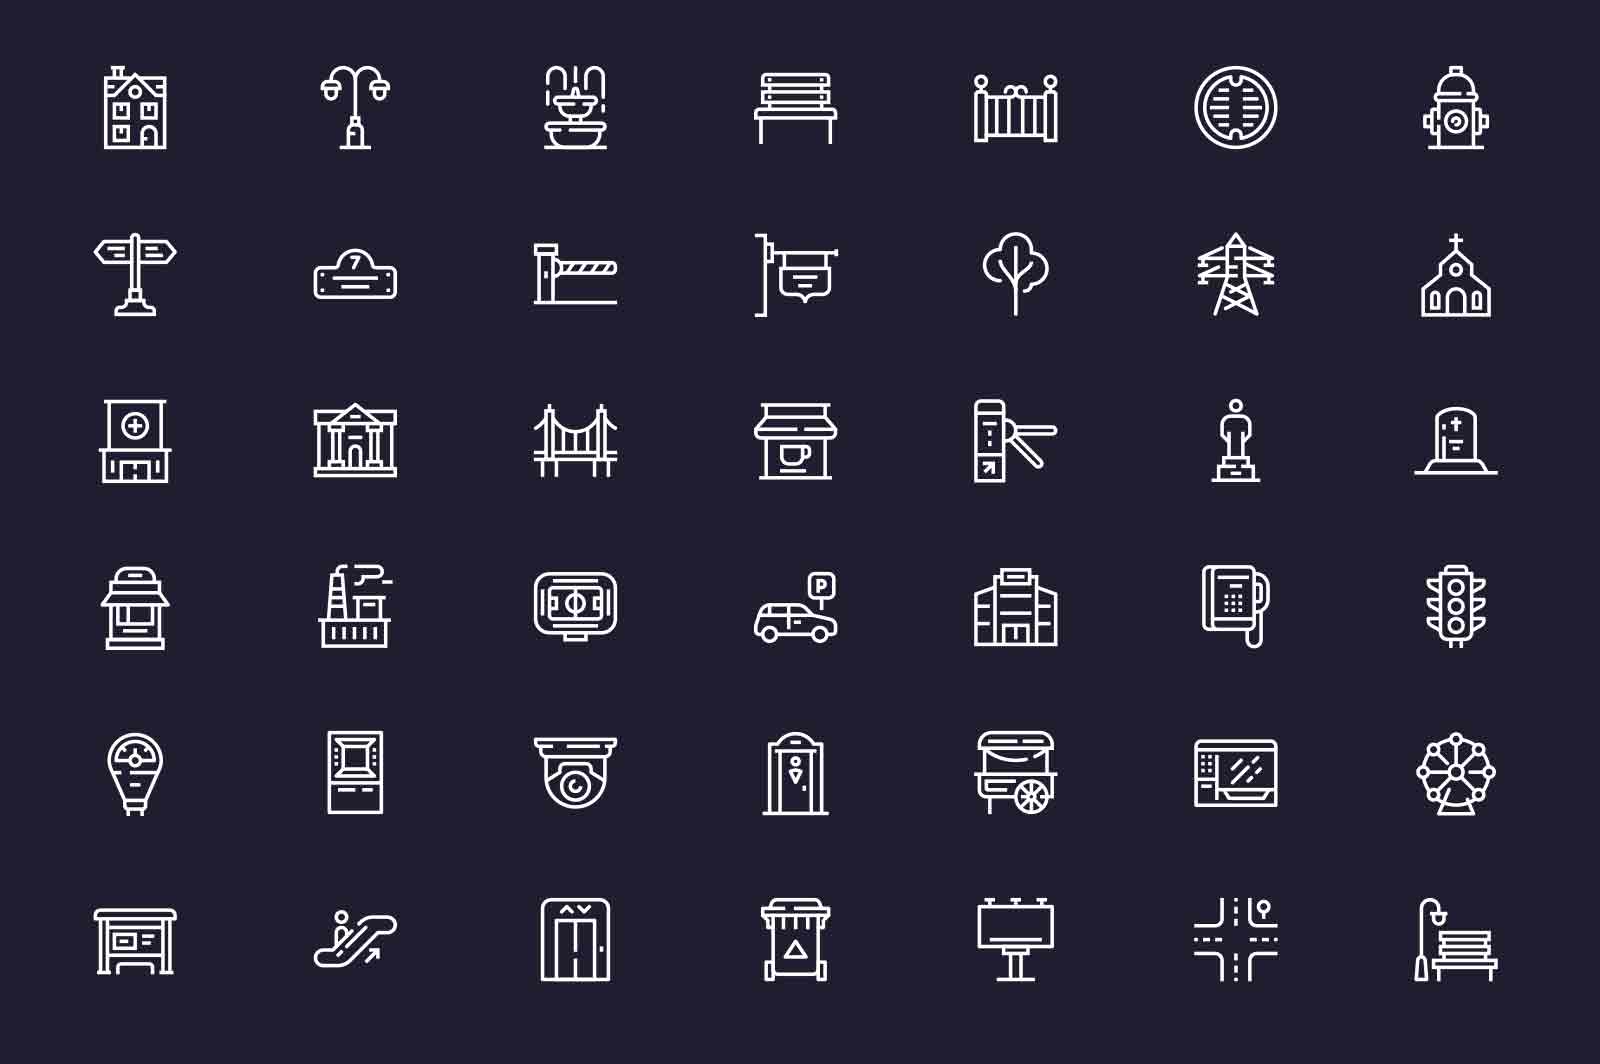 Urban city elements for design icons set vector illustration. Collection of linear icon for town decoration. Dark background